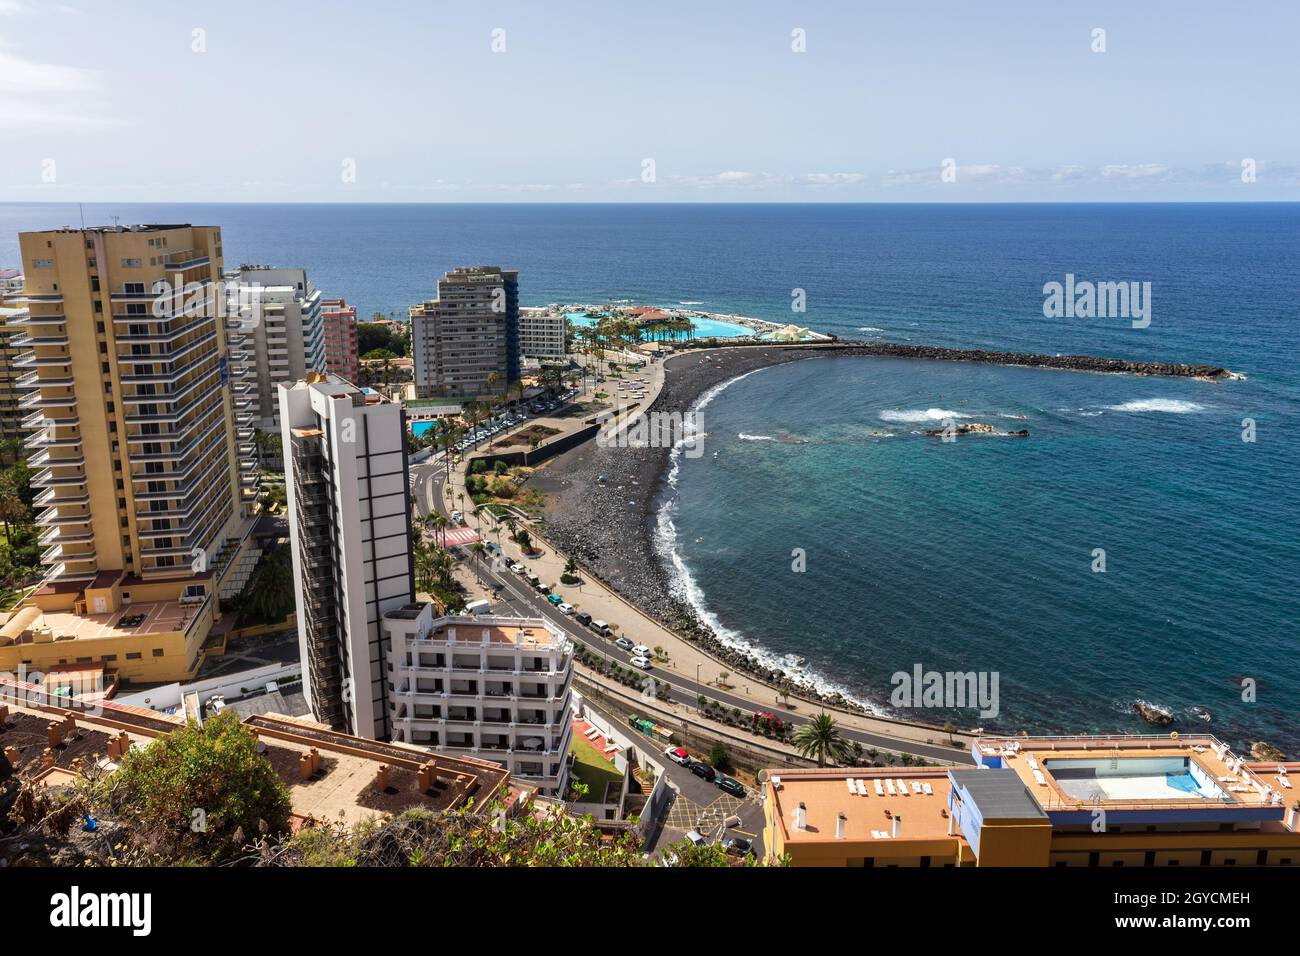 PUERTO DE LA CRUZ, CANARY ISLANDS, SPAIN - JULY 02, 2021: A view on the city from a height of observation deck: Mirador La Paz. Stock Photo